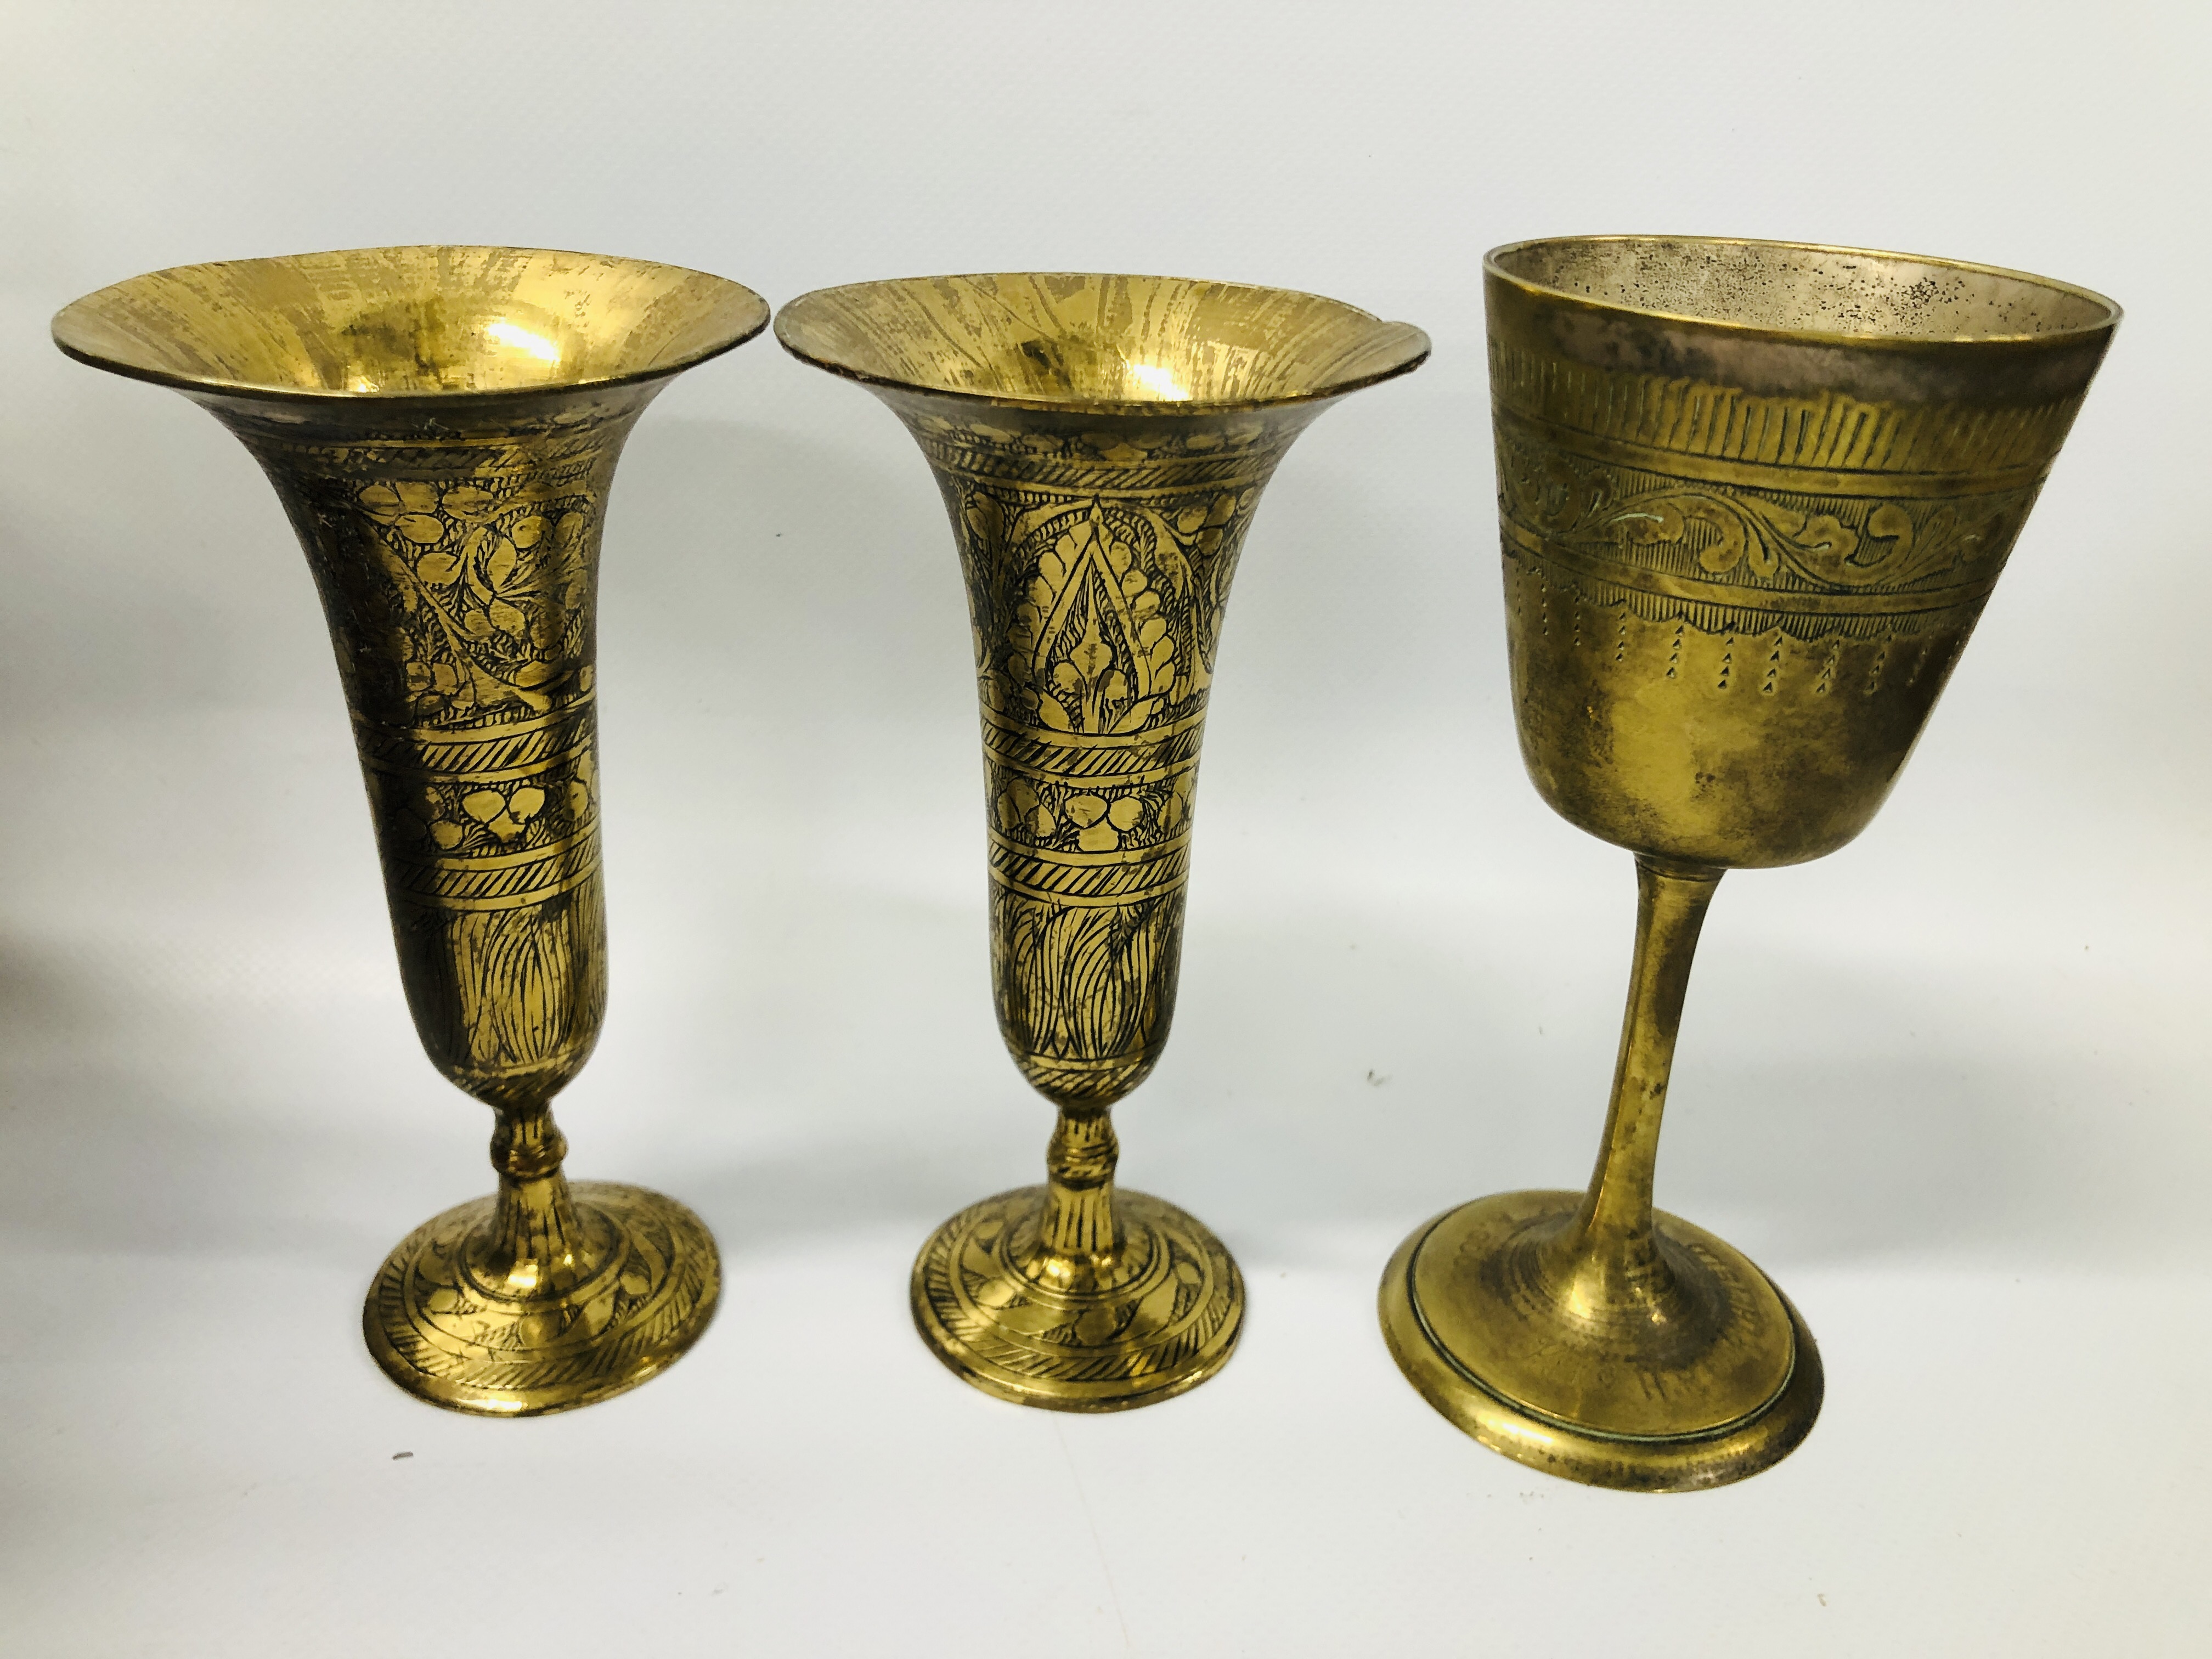 MIXED BRASS AND COPPER TO INCLUDE OIL LAMPS, LAMPS, STOVE, TRIVET, WATERING CAN, SCALES, CUPS, - Image 5 of 27